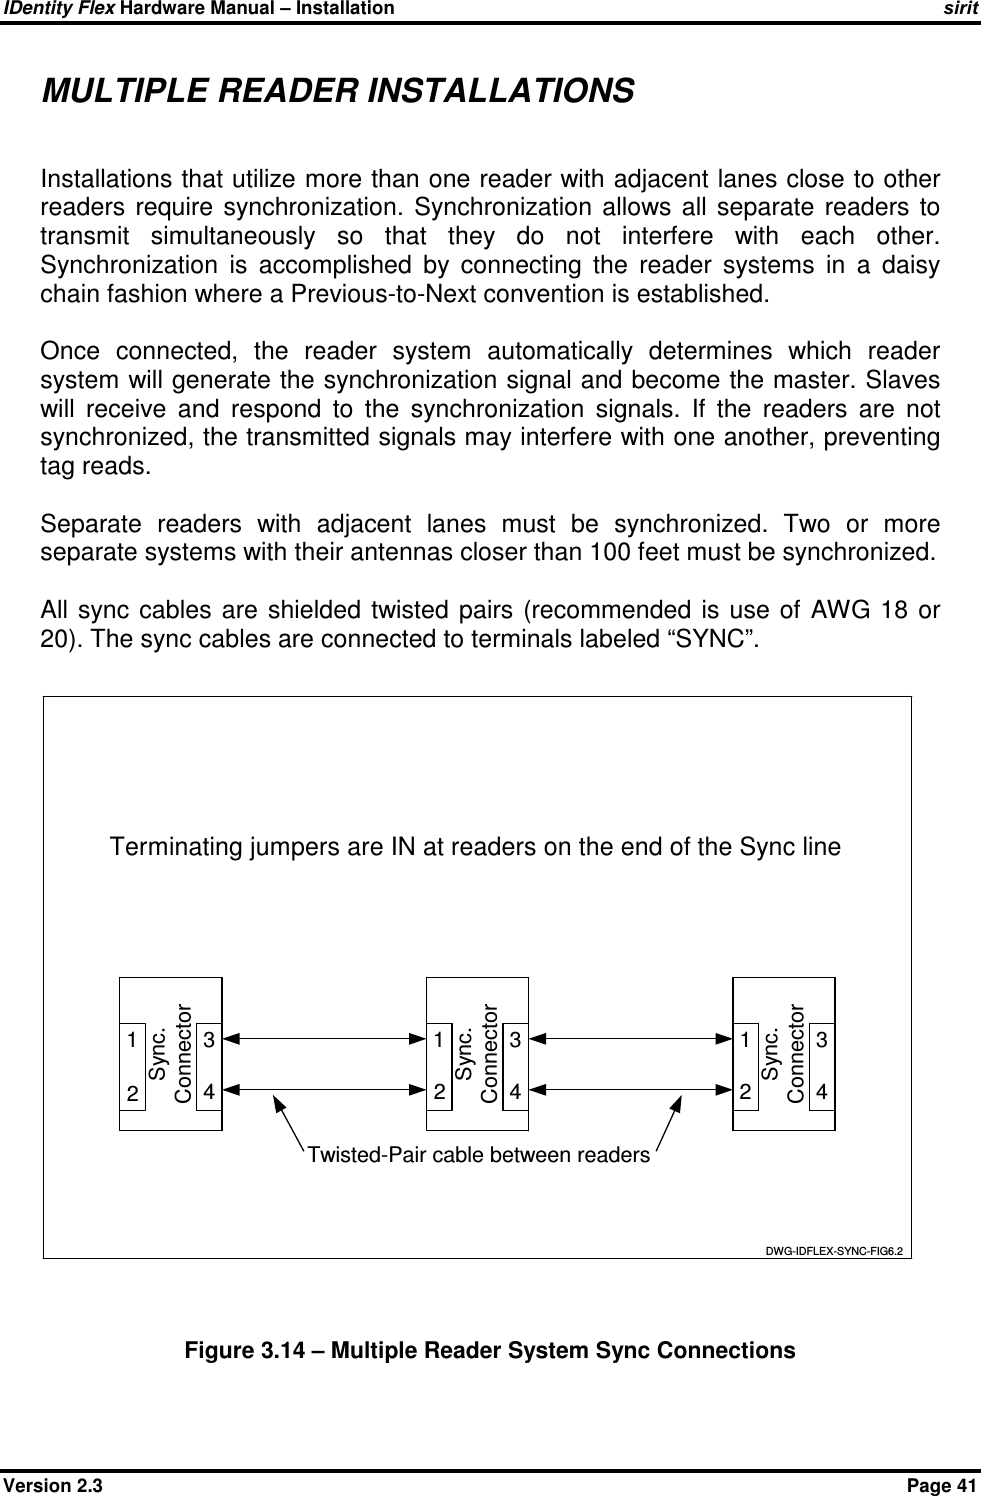 IDentity Flex Hardware Manual – Installation   sirit Version 2.3    Page 41 MULTIPLE READER INSTALLATIONS  Installations that utilize more than one reader with adjacent lanes close to other readers  require  synchronization.  Synchronization  allows  all  separate  readers  to transmit  simultaneously  so  that  they  do  not  interfere  with  each  other.  Synchronization  is  accomplished  by  connecting  the  reader  systems  in  a  daisy chain fashion where a Previous-to-Next convention is established.   Once  connected,  the  reader  system  automatically  determines  which  reader system will generate the synchronization signal and become the master. Slaves will  receive  and  respond  to  the  synchronization  signals.  If  the  readers  are  not synchronized, the transmitted signals may interfere with one another, preventing tag reads.  Separate  readers  with  adjacent  lanes  must  be  synchronized.  Two  or  more separate systems with their antennas closer than 100 feet must be synchronized.  All  sync cables  are  shielded  twisted  pairs (recommended  is  use of  AWG 18  or 20). The sync cables are connected to terminals labeled “SYNC”.  432143 3412Sync.ConnectorSync.ConnectorSync.Connector Twisted-Pair cable between readersDWG-IDFLEX-SYNC-FIG6.212Terminating jumpers are IN at readers on the end of the Sync line  Figure 3.14 – Multiple Reader System Sync Connections 